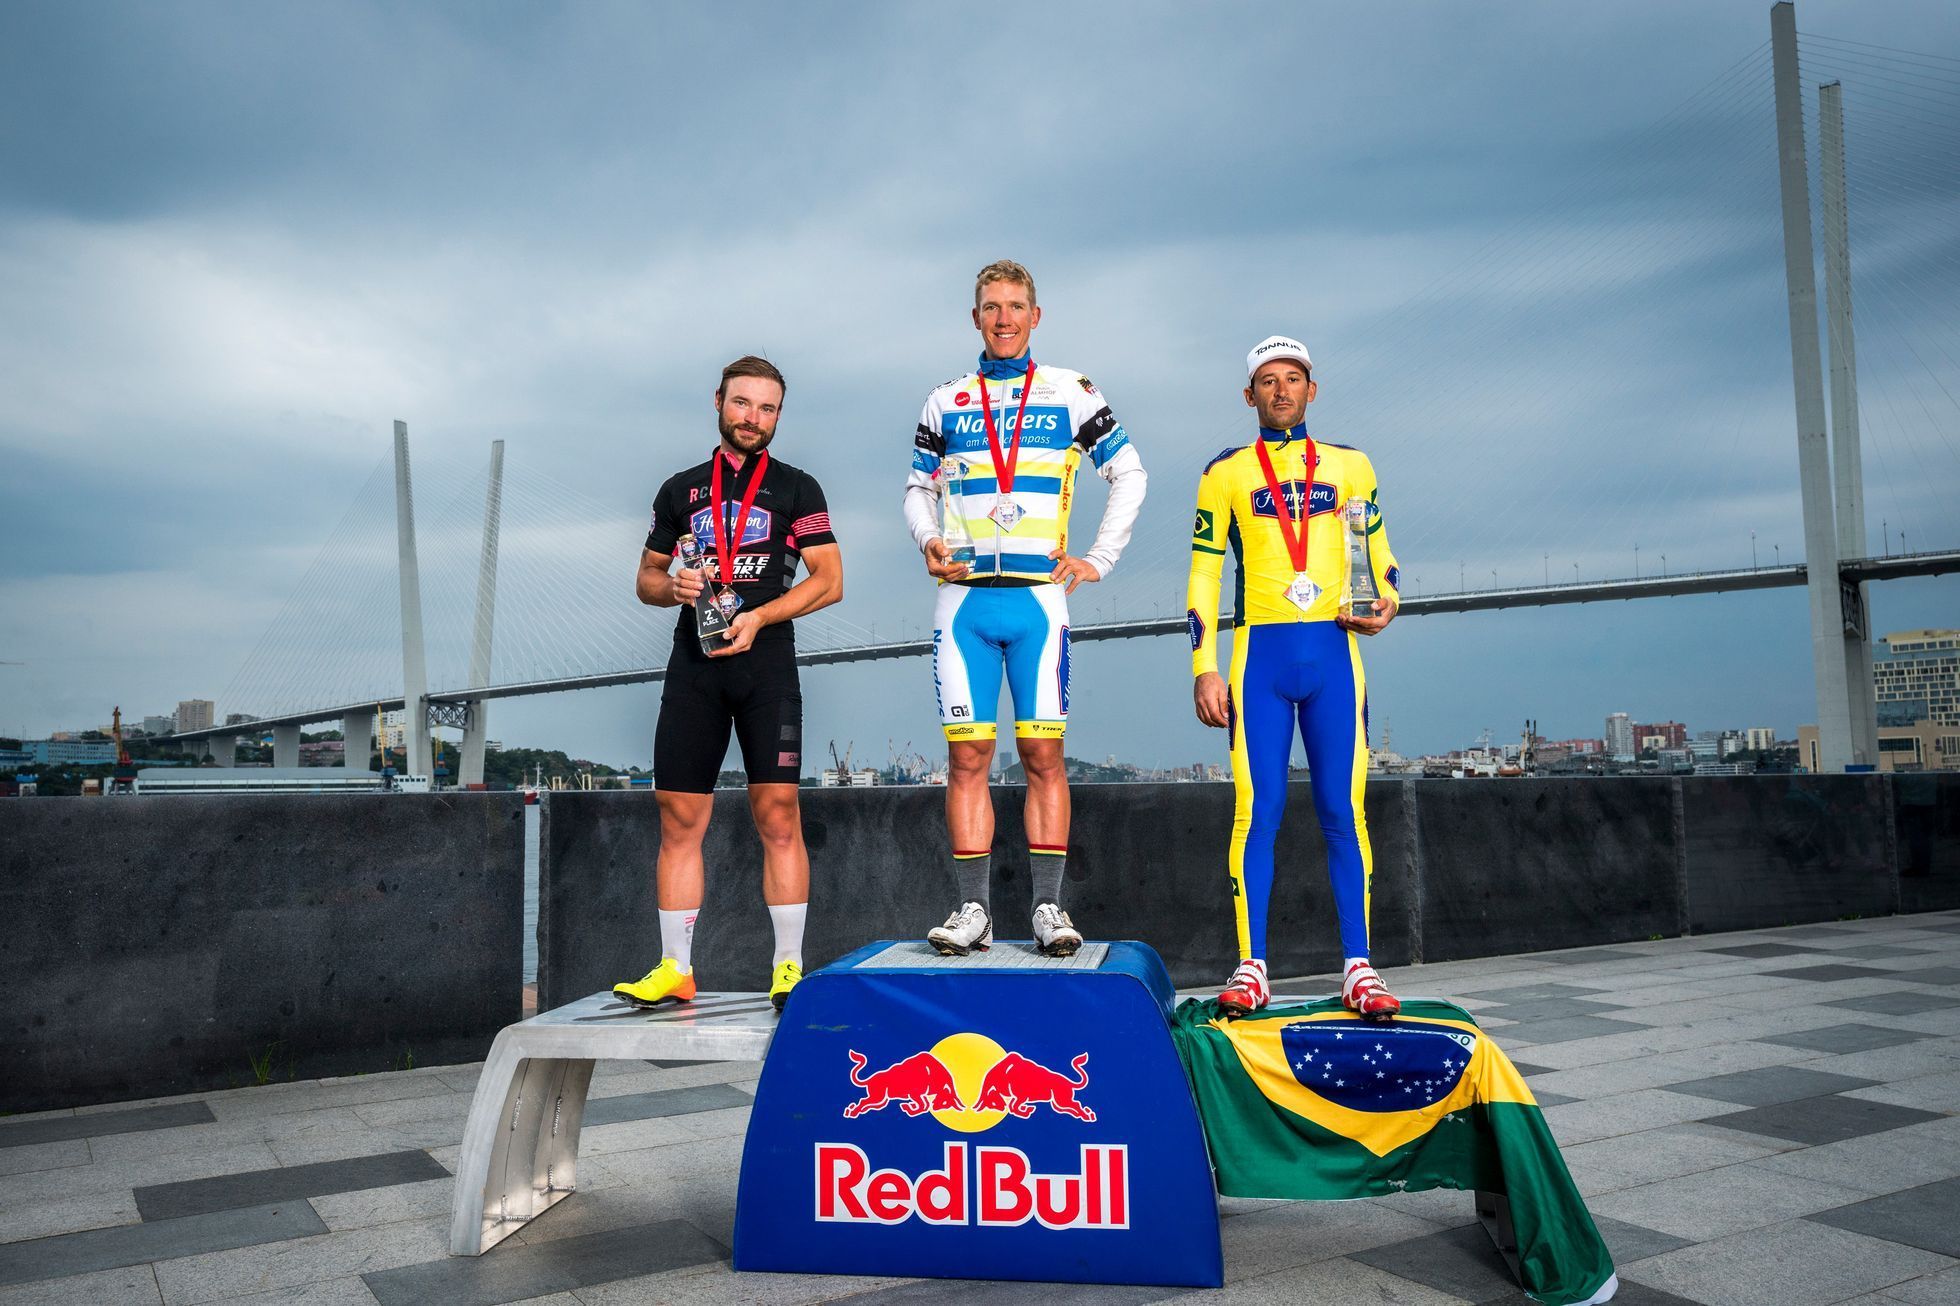 Red Bull Trans-Siberian Extreme Race 2018